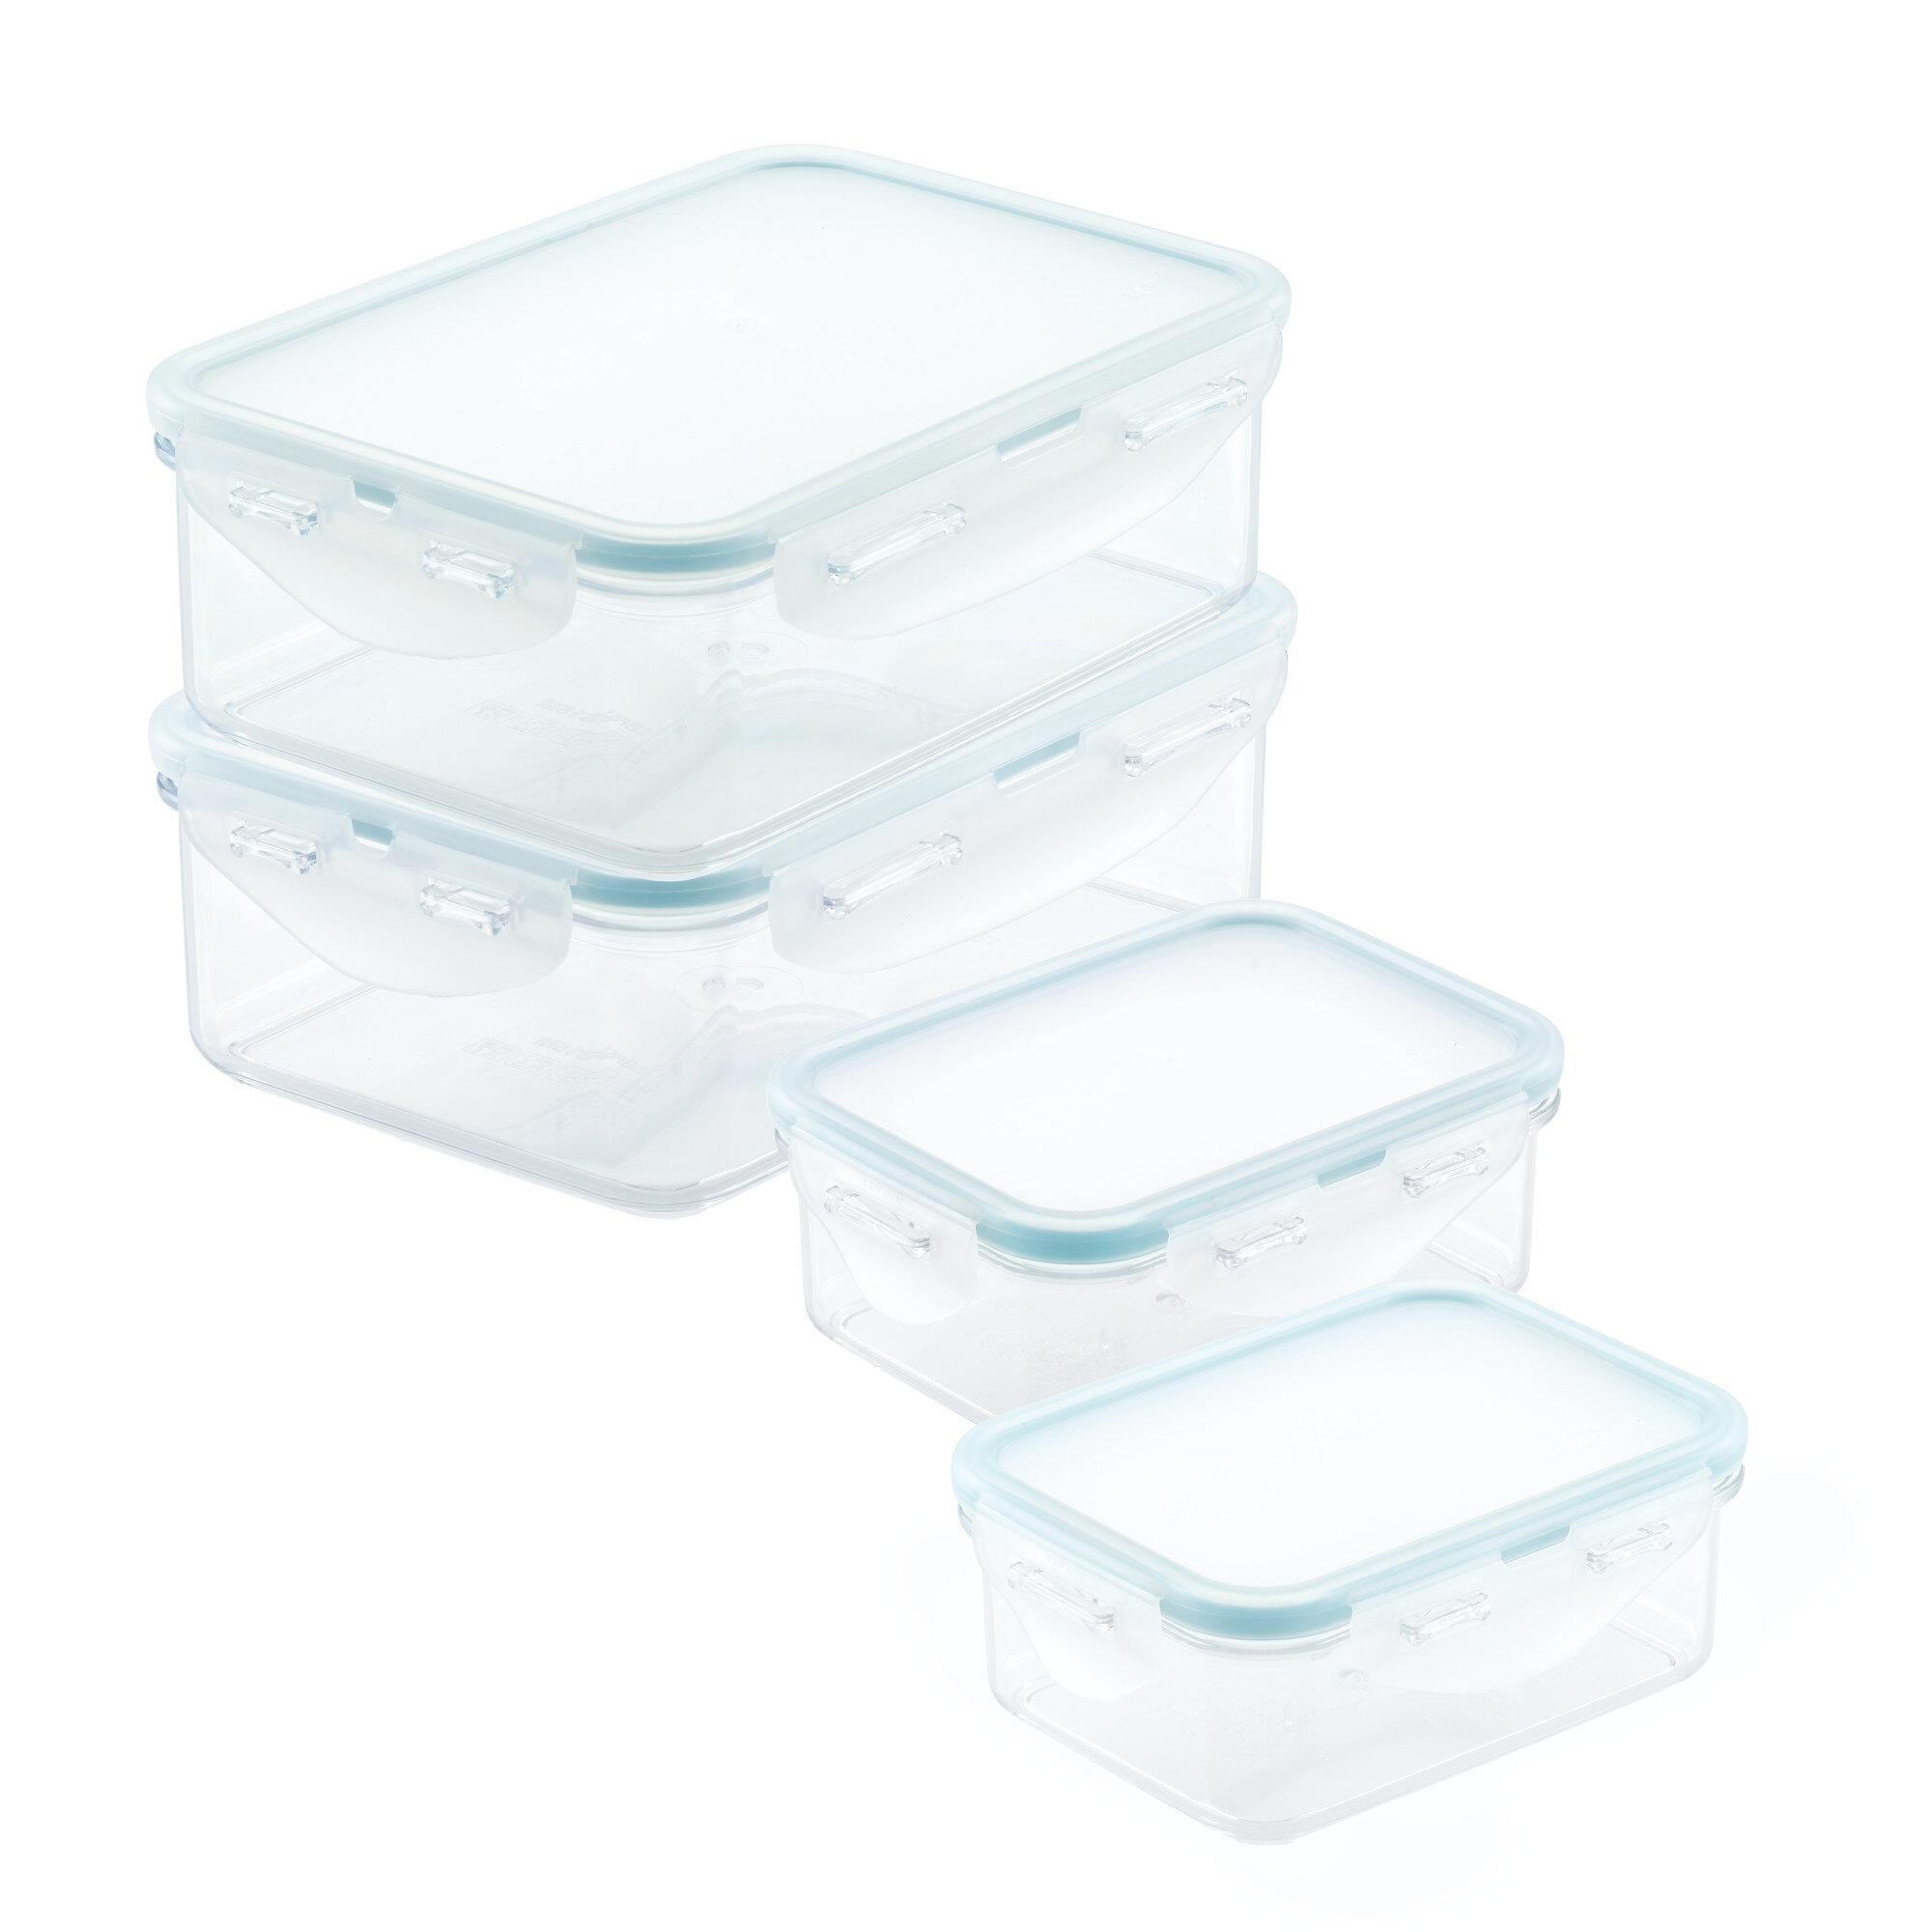 LocknLock Purely Better Food Storage with Dividers 12oz 4 PC Set